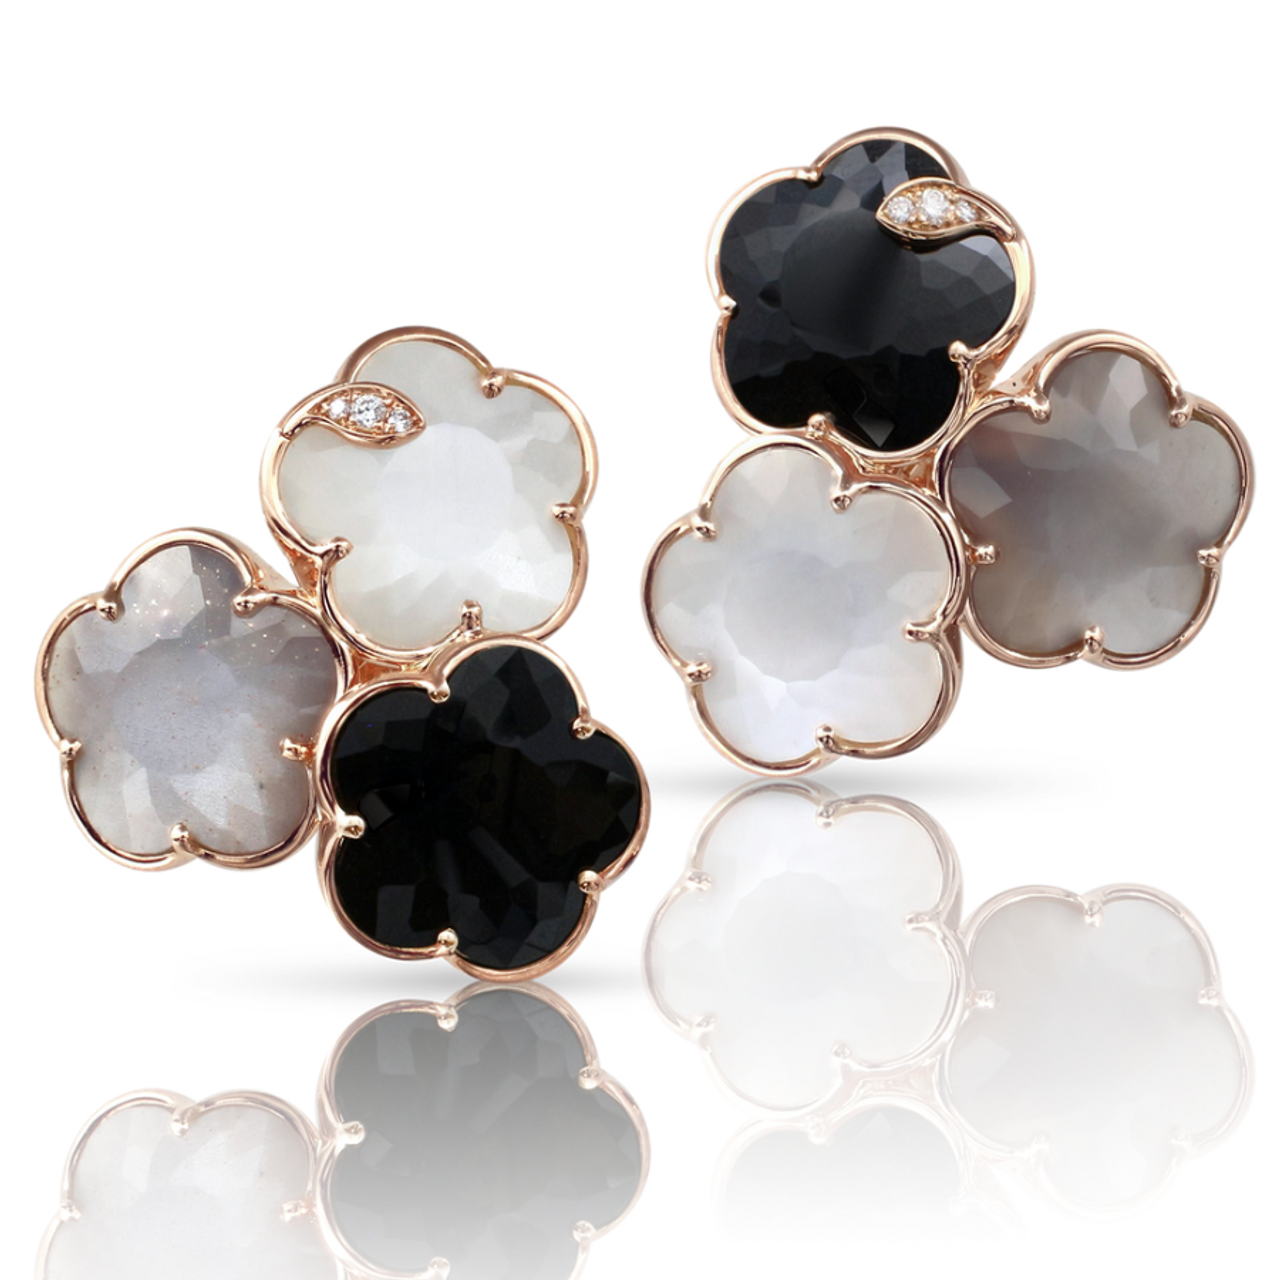 Pasquale Bruni Bouquet Lunaire 18K Rose Gold Earrings with Moon Gems and  Diamonds